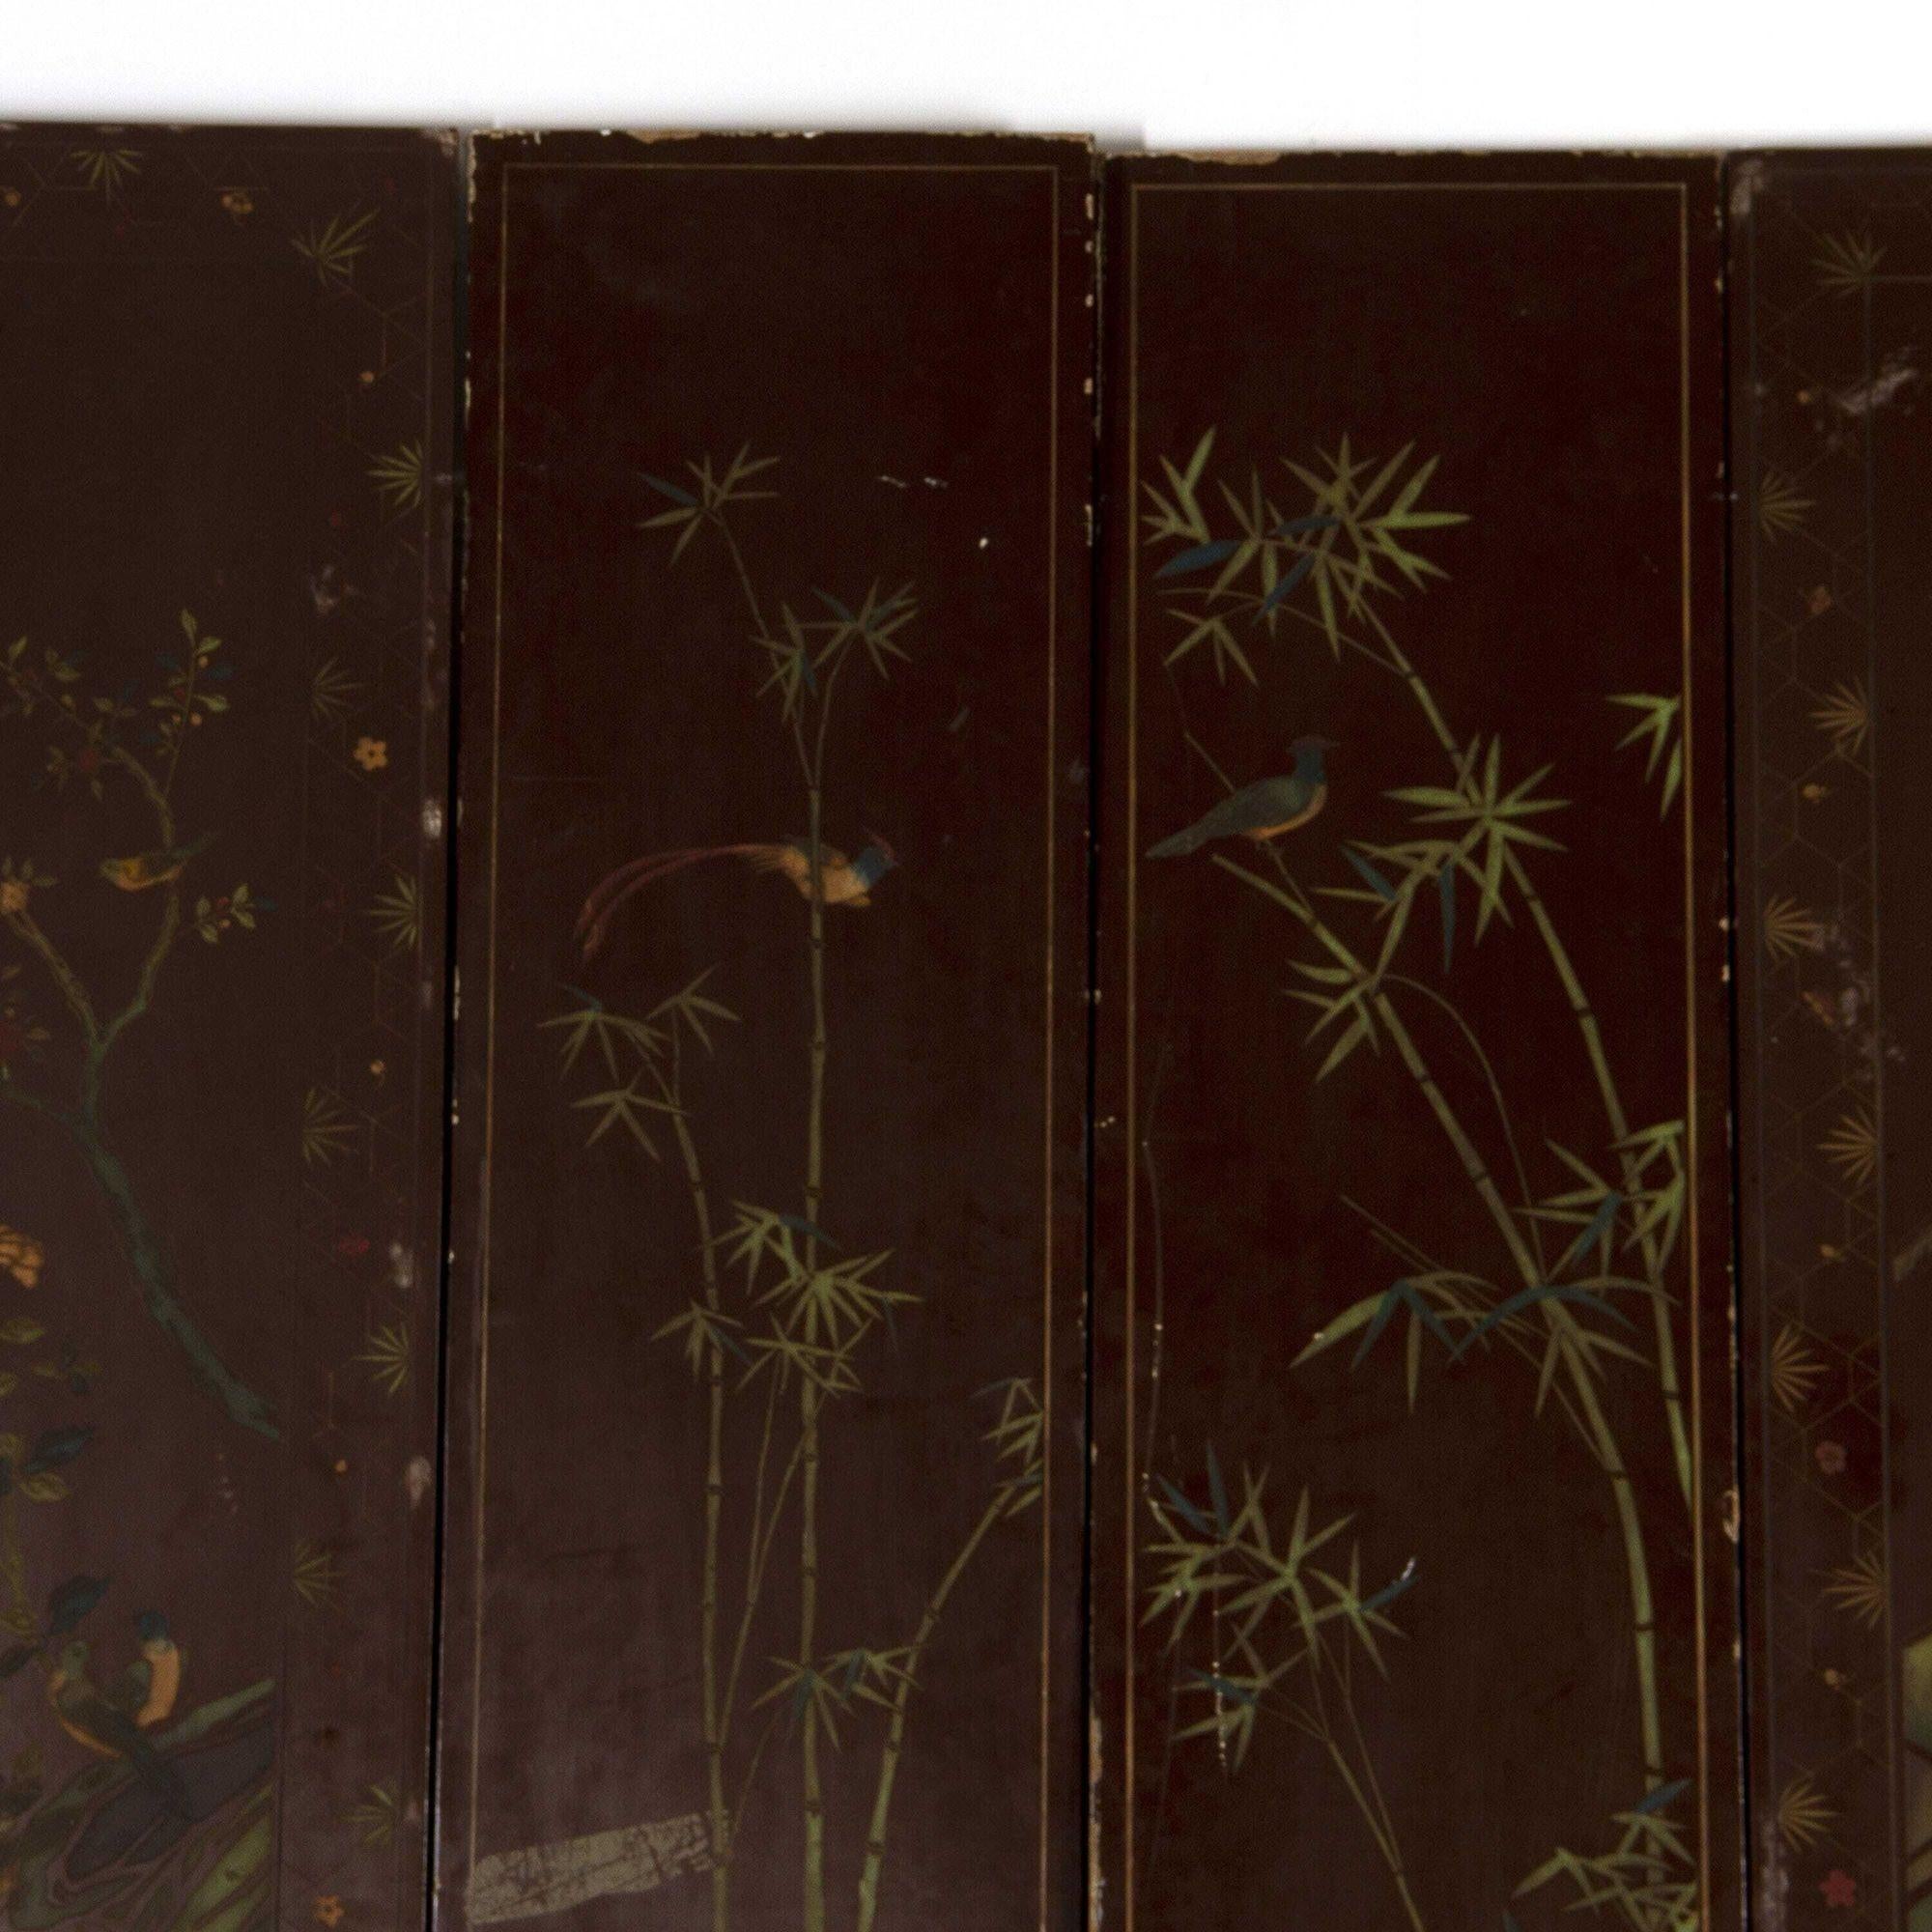 Monumental 19th Century lacquered screen with a Chinoiserie design throughout. 
This fantastic screen features ten folding panels which are decorated on both sides. Each panel is beautifully painted with typical Chinese foliate designs and social